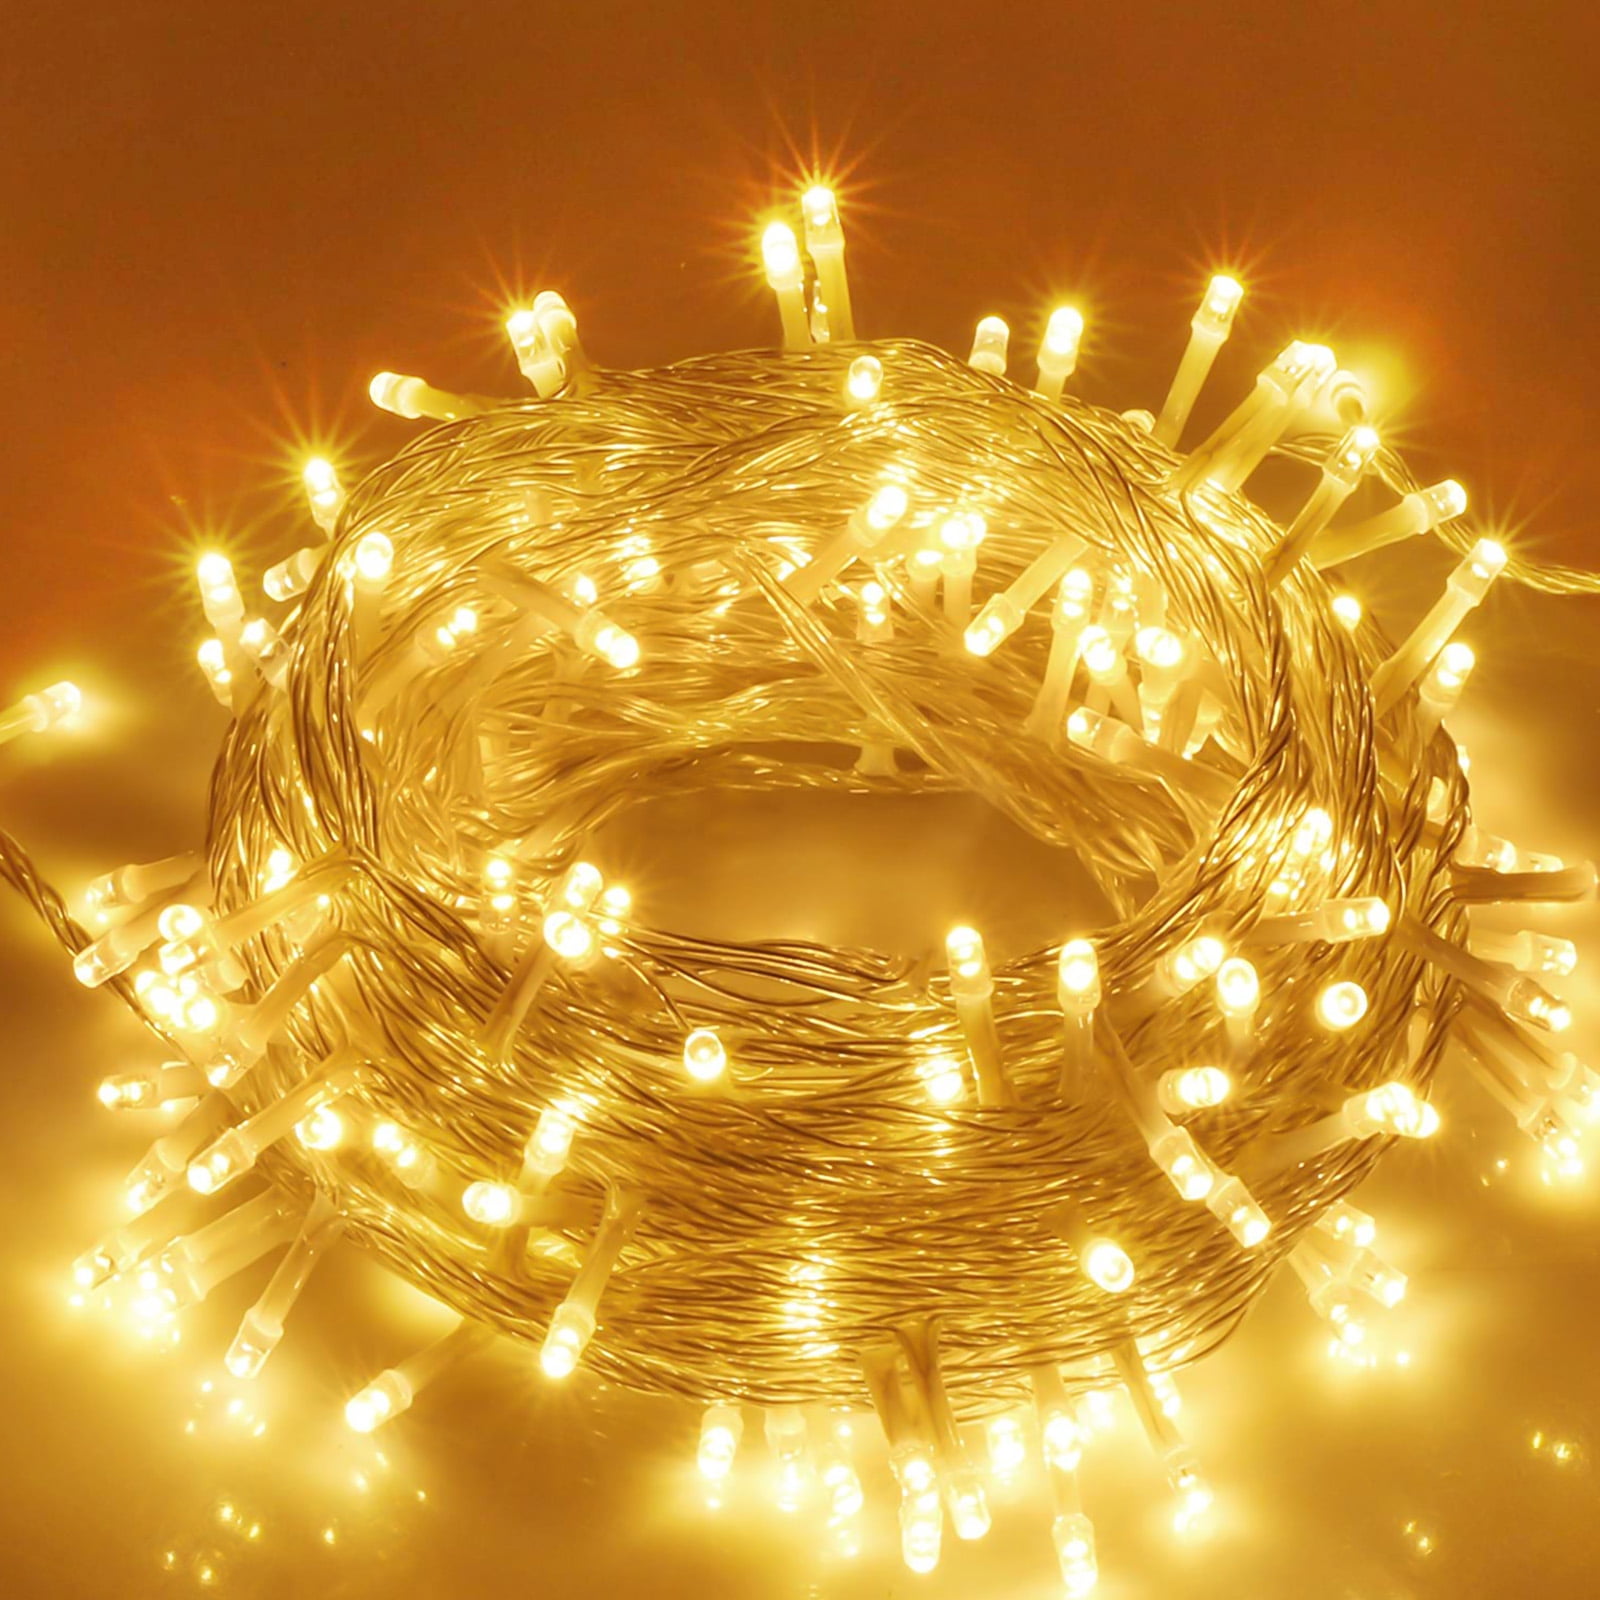 Twinkle Star 33ft 100LED Copper Wire String Lights Fairy String Lights 8 Modes LED String Lights USB Powered with Remote Control for Wedding Party Home Christmas Decoration Warm White 